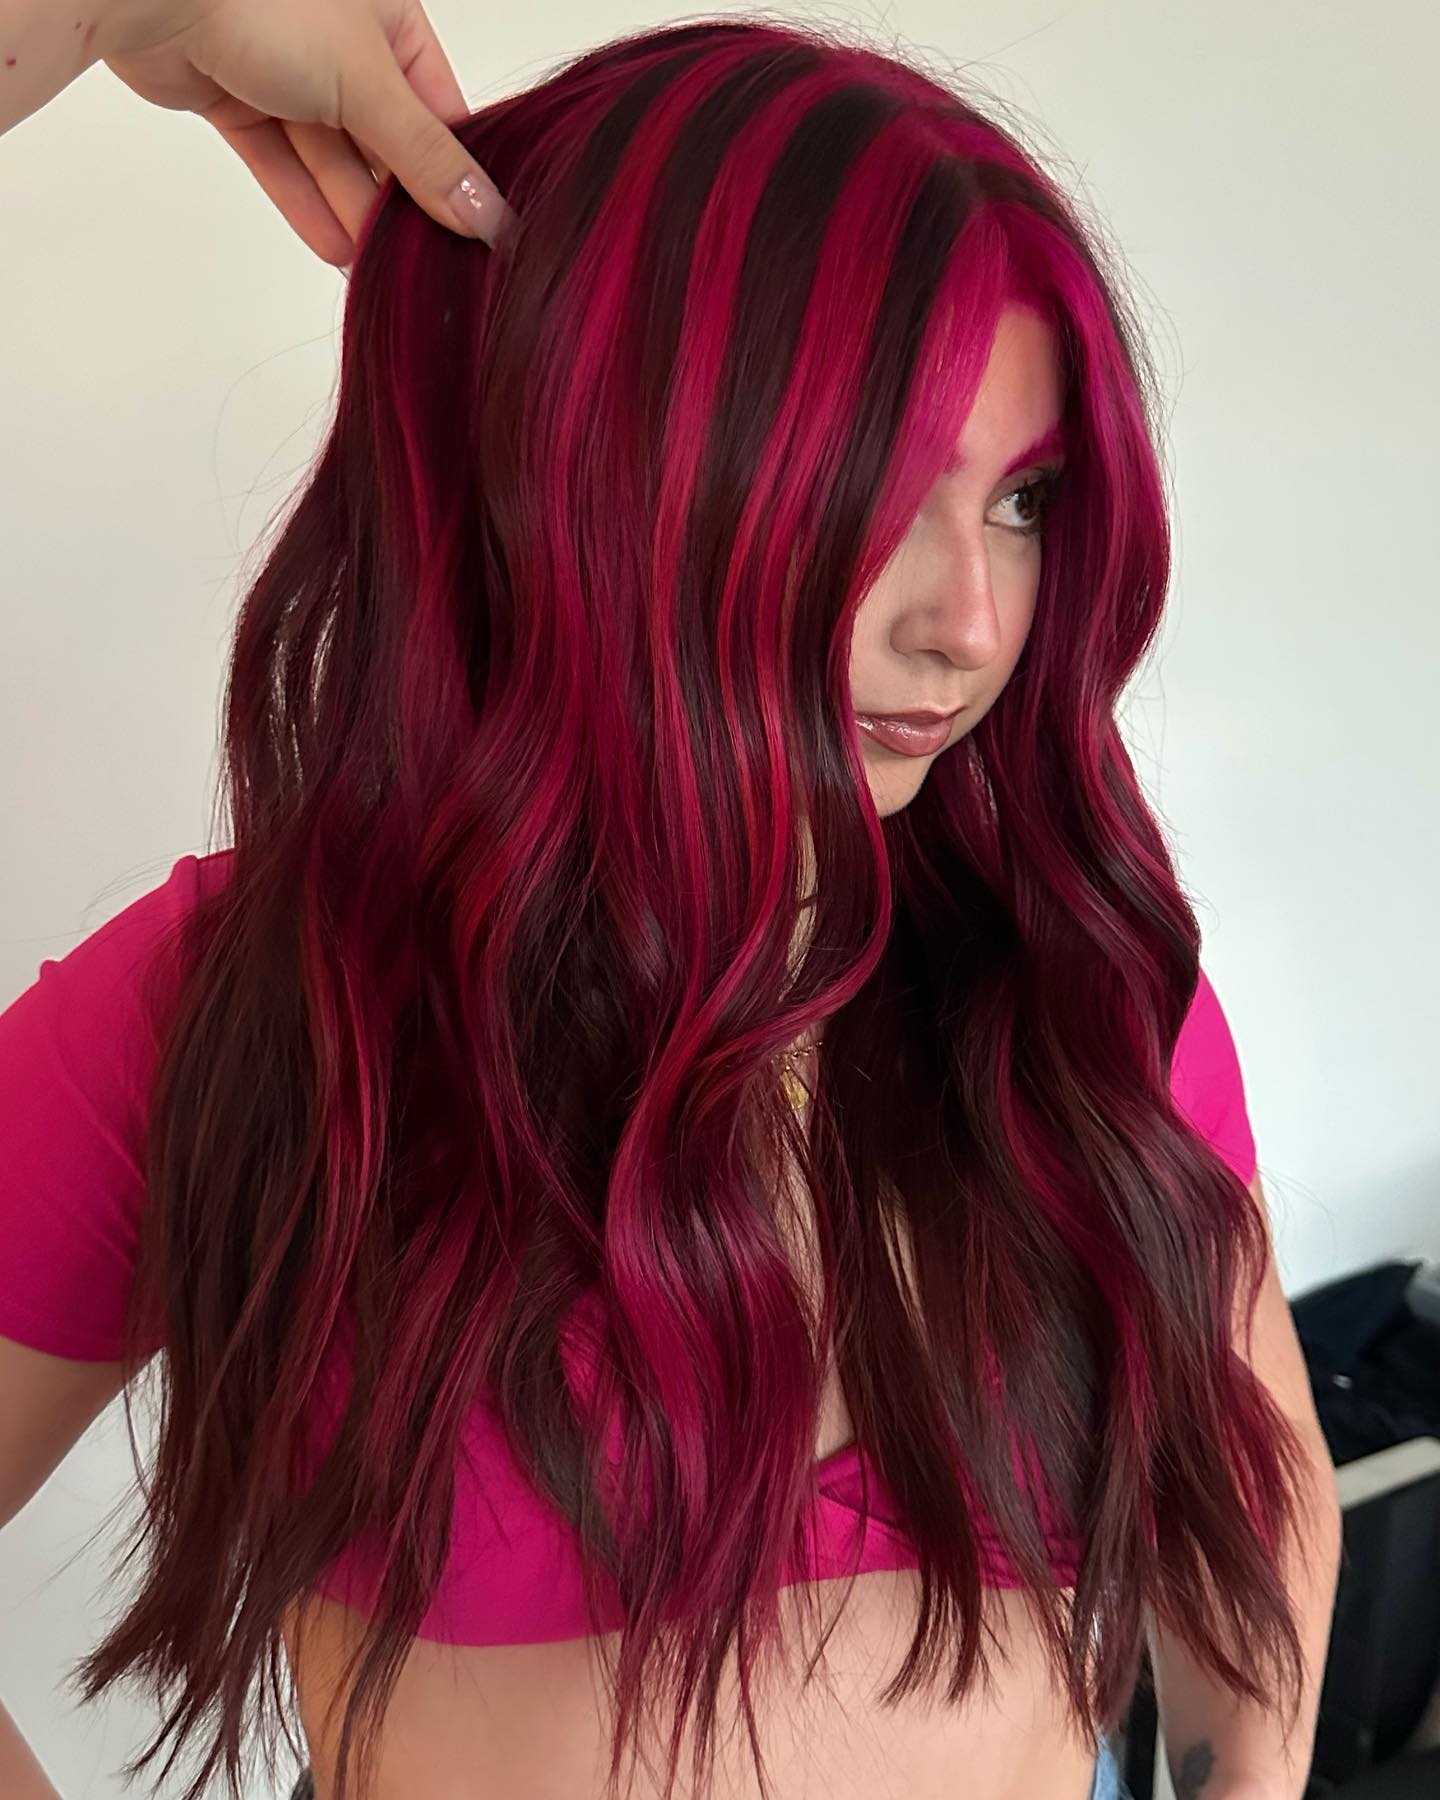 Pink and Black Stripes on Long Hair